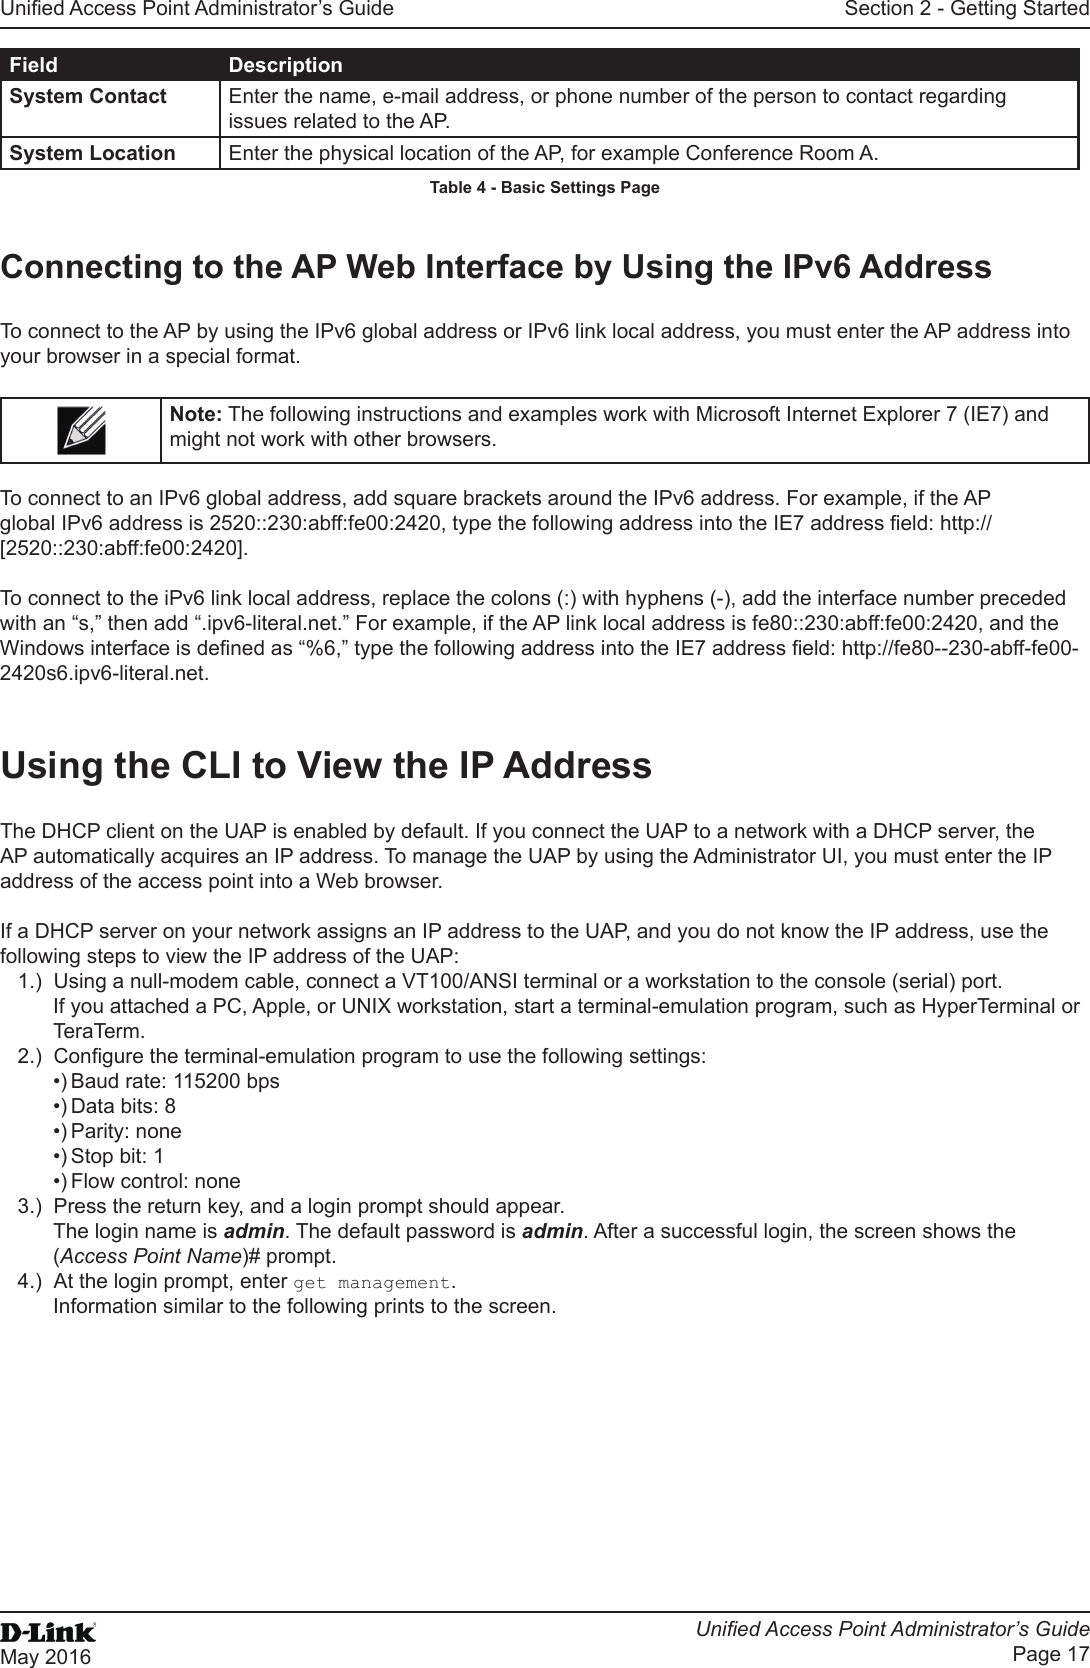 Unied Access Point Administrator’s GuideUnied Access Point Administrator’s GuidePage 17May 2016Section 2 - Getting StartedField DescriptionSystem Contact Enter the name, e-mail address, or phone number of the person to contact regarding issues related to the AP.System Location Enter the physical location of the AP, for example Conference Room A.Table 4 - Basic Settings PageConnecting to the AP Web Interface by Using the IPv6 AddressTo connect to the AP by using the IPv6 global address or IPv6 link local address, you must enter the AP address into your browser in a special format.Note: The following instructions and examples work with Microsoft Internet Explorer 7 (IE7) and might not work with other browsers.To connect to an IPv6 global address, add square brackets around the IPv6 address. For example, if the AP global IPv6 address is 2520::230:abff:fe00:2420, type the following address into the IE7 address eld: http://[2520::230:abff:fe00:2420].To connect to the iPv6 link local address, replace the colons (:) with hyphens (-), add the interface number preceded with an “s,” then add “.ipv6-literal.net.” For example, if the AP link local address is fe80::230:abff:fe00:2420, and the Windows interface is dened as “%6,” type the following address into the IE7 address eld: http://fe80--230-abff-fe00-2420s6.ipv6-literal.net.Using the CLI to View the IP AddressThe DHCP client on the UAP is enabled by default. If you connect the UAP to a network with a DHCP server, the AP automatically acquires an IP address. To manage the UAP by using the Administrator UI, you must enter the IP address of the access point into a Web browser. If a DHCP server on your network assigns an IP address to the UAP, and you do not know the IP address, use the following steps to view the IP address of the UAP:1.)  Using a null-modem cable, connect a VT100/ANSI terminal or a workstation to the console (serial) port.If you attached a PC, Apple, or UNIX workstation, start a terminal-emulation program, such as HyperTerminal or TeraTerm.2.)  Congure the terminal-emulation program to use the following settings:•) Baud rate: 115200 bps•) Data bits: 8•) Parity: none•) Stop bit: 1•) Flow control: none3.)  Press the return key, and a login prompt should appear.The login name is admin. The default password is admin. After a successful login, the screen shows the (Access Point Name)# prompt. 4.)  At the login prompt, enter get management.Information similar to the following prints to the screen.